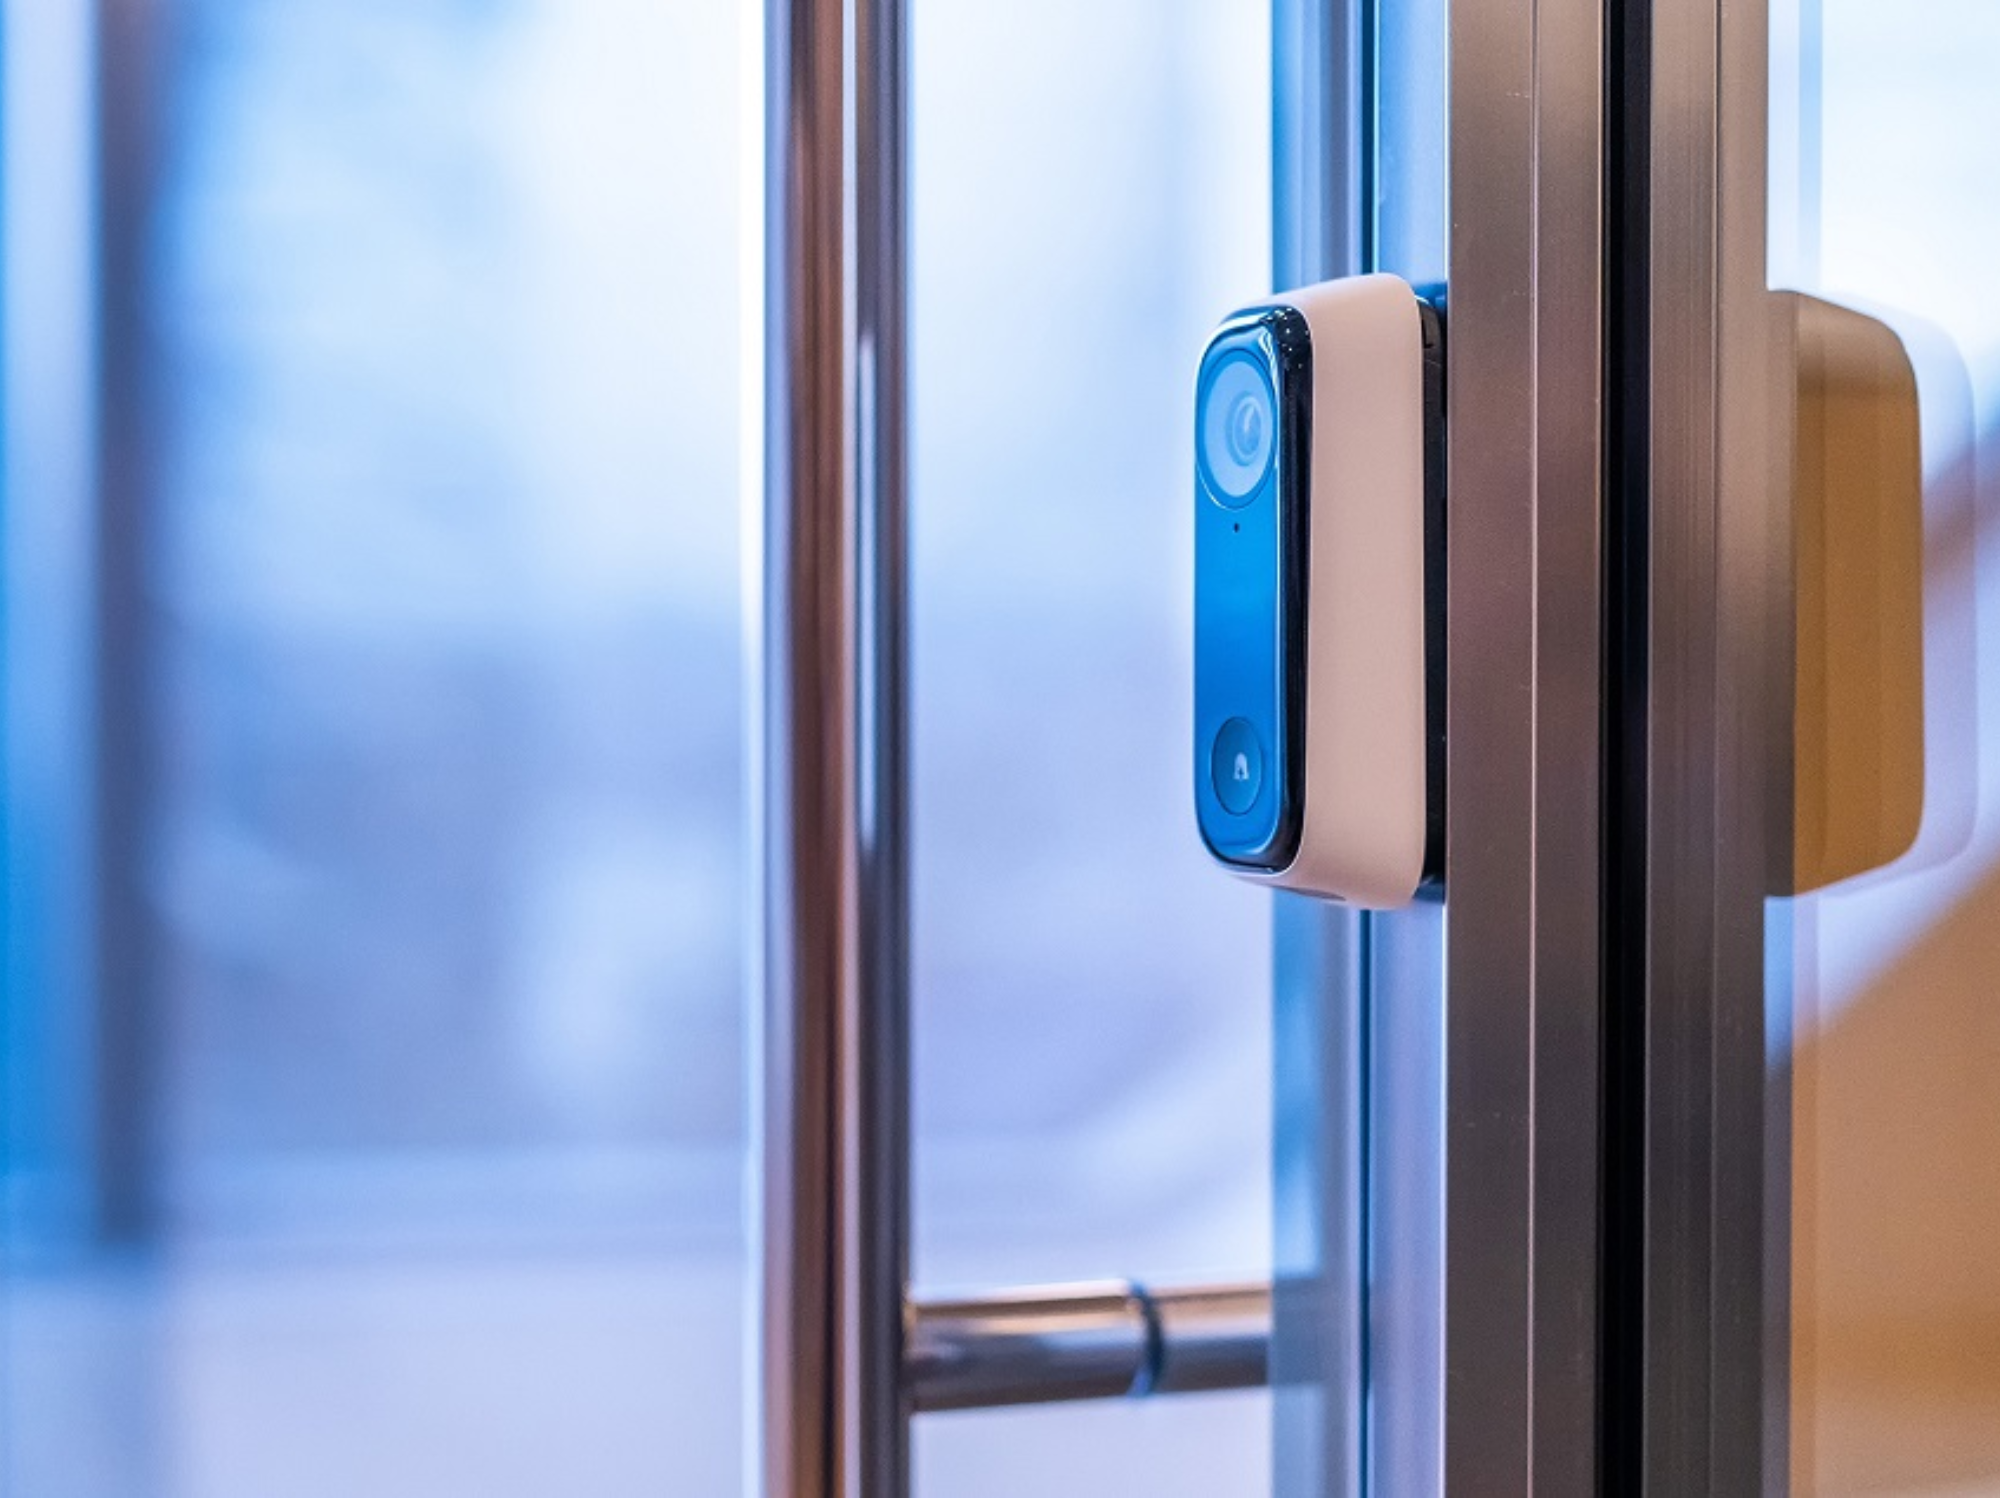 Comcast launches the new Xfinity Video Doorbell featuring a head-to-toe view of your front door, motion alerts, Two Way audio and more